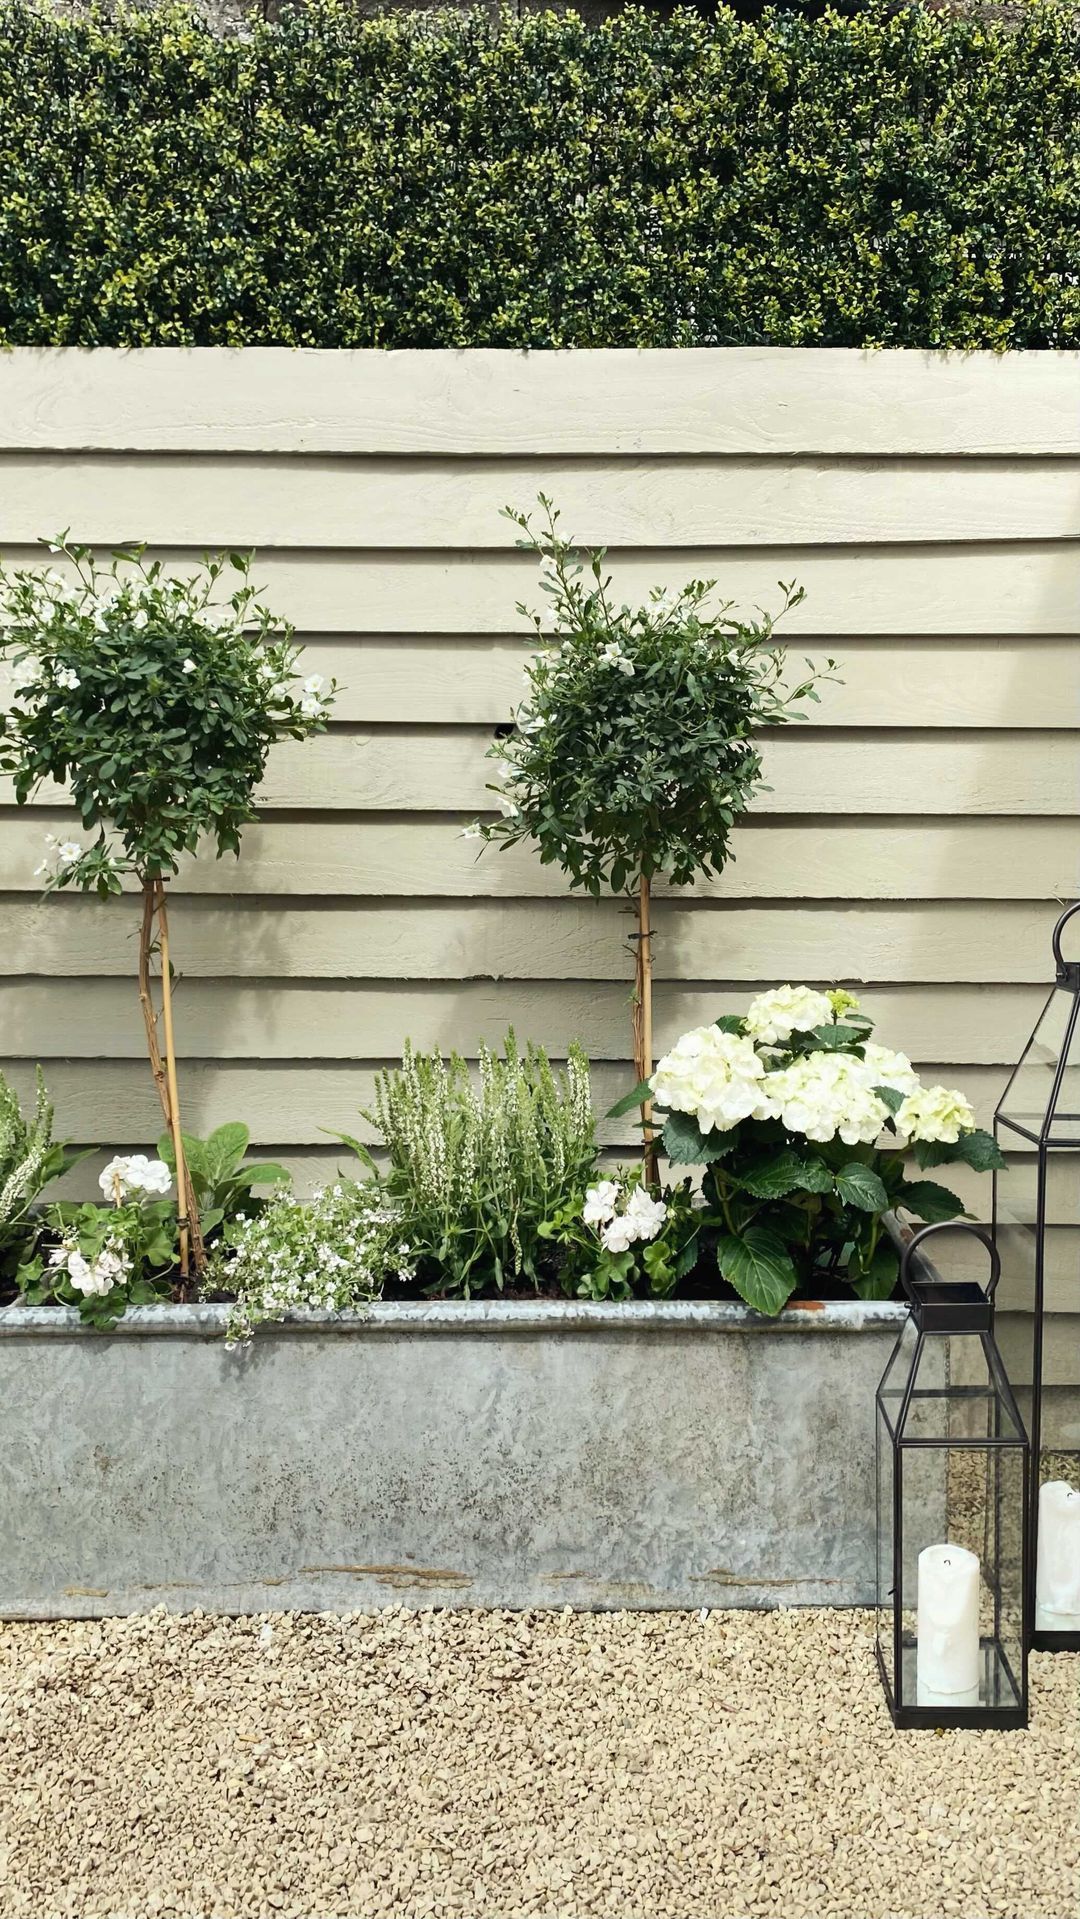 Compact Front Yard: Making the Most of Small Outdoor Spaces